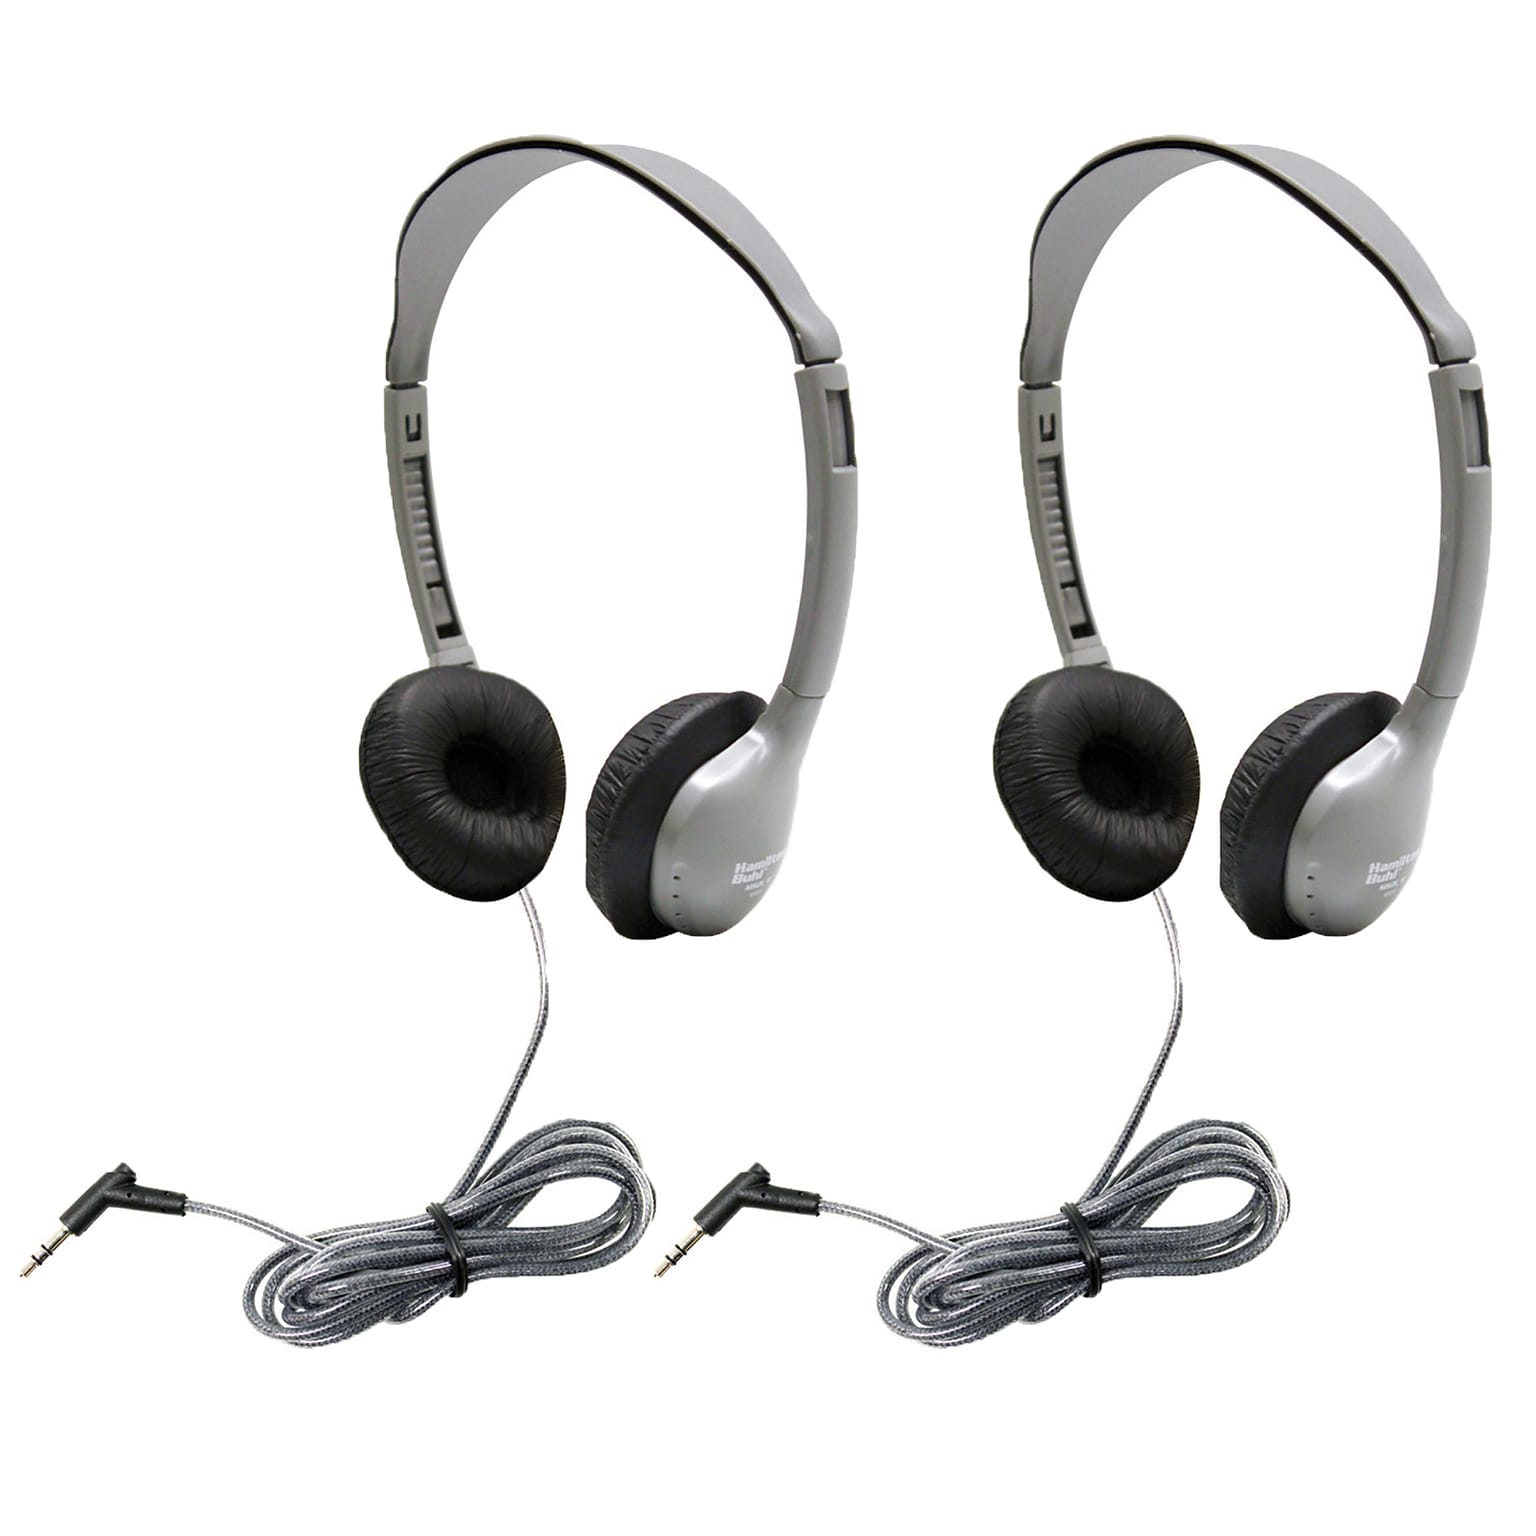 HamiltonBuhl SchoolMate Personal Stereo Headphone with Leatherette Cushions, Pack of 2 (HECMS2L-2)